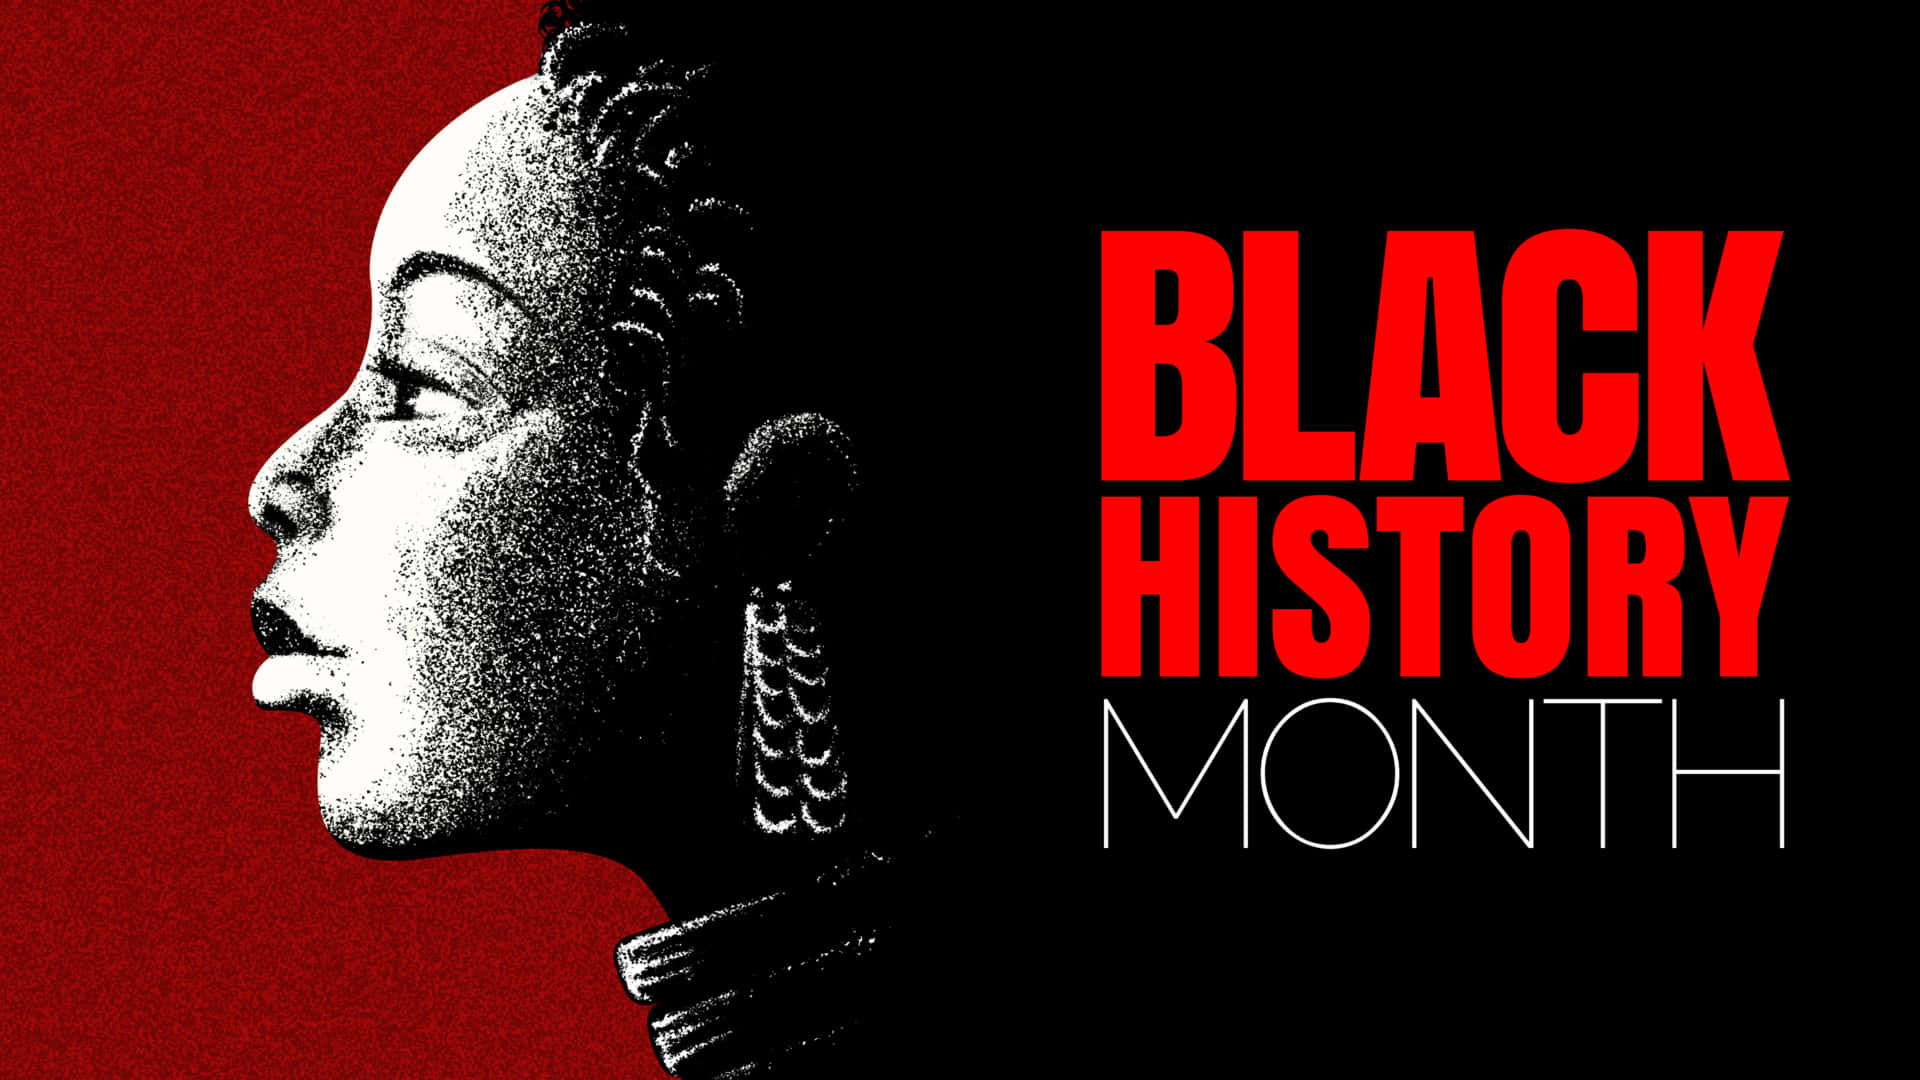 Embracing Our History - Black History Month Background